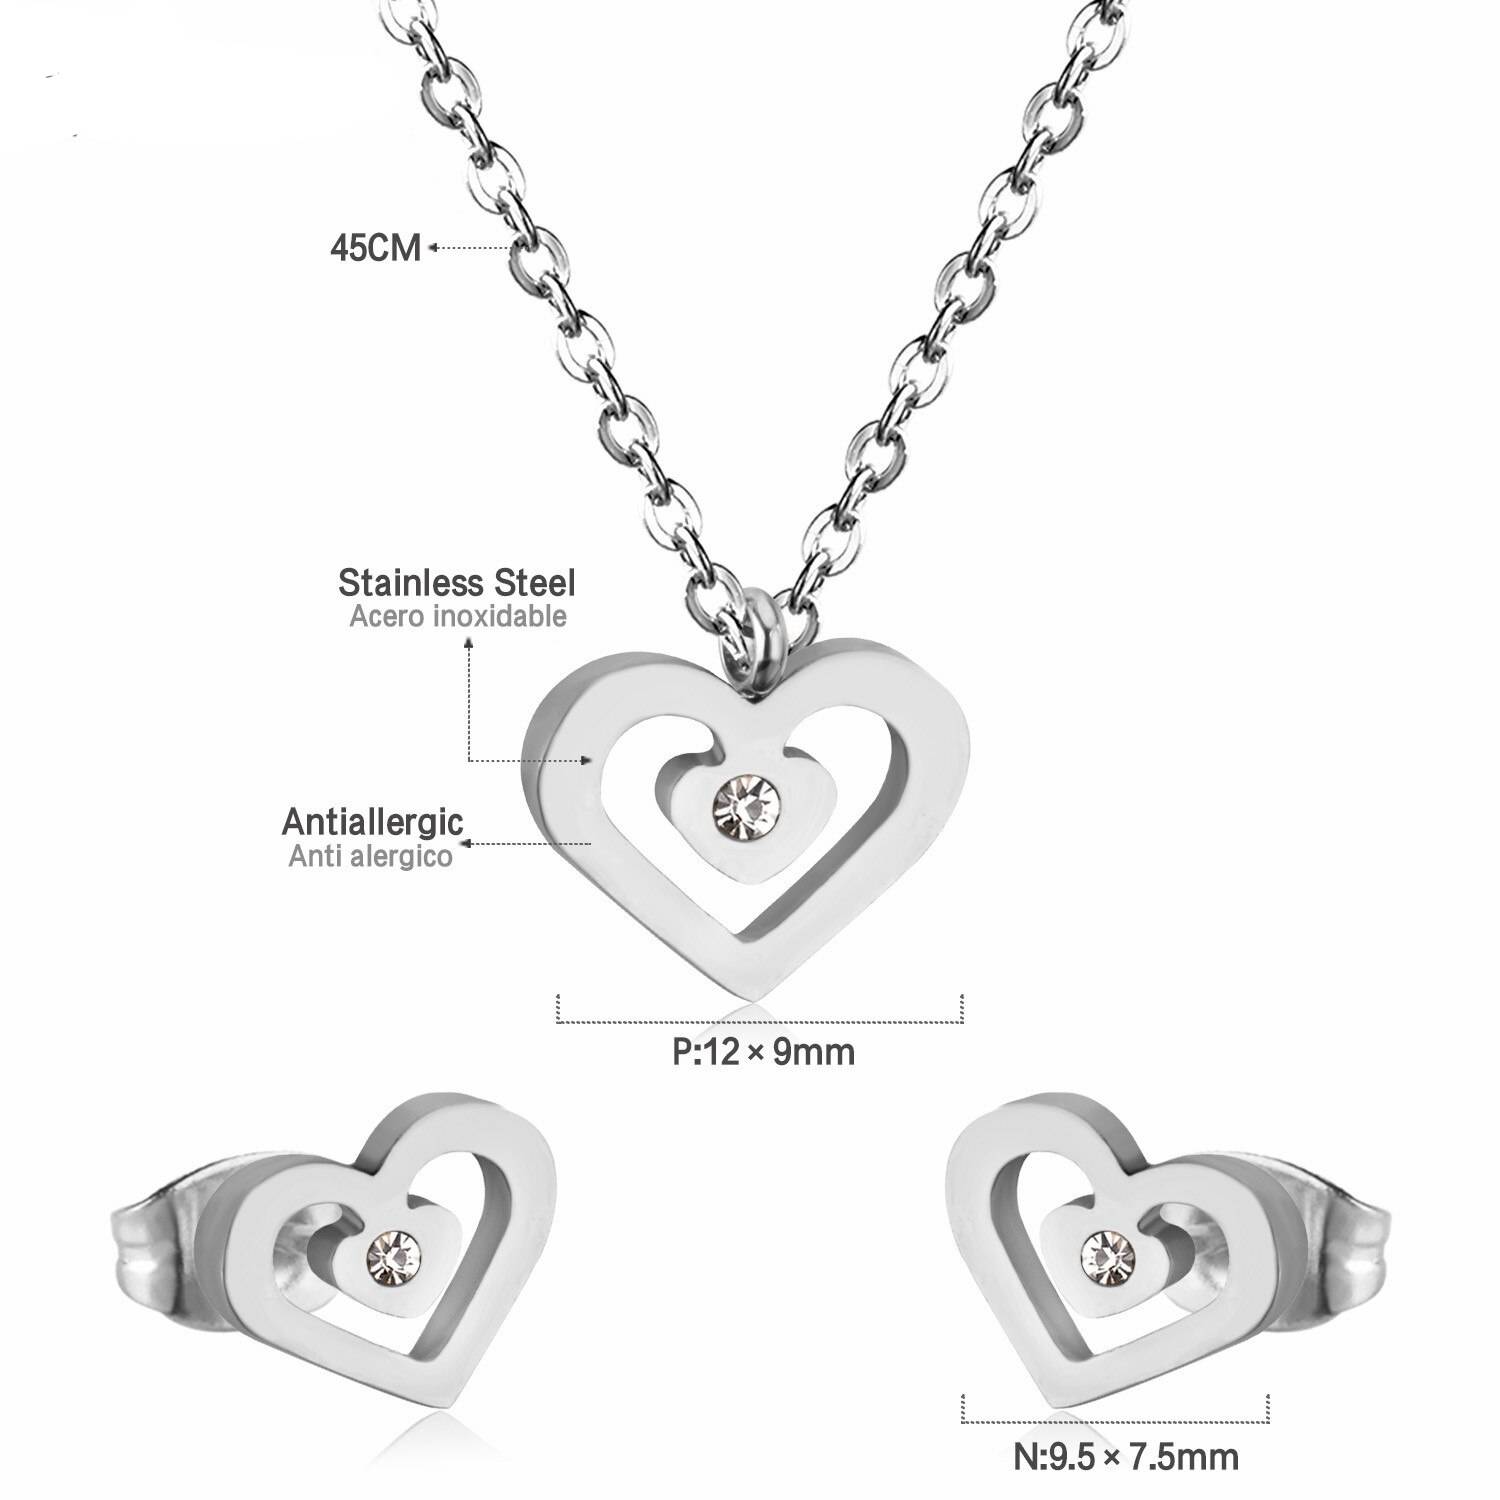 Nora – Stainless Steel Cubic Zirconia Heart Jewellery Set Jewellery Sets 8d255f28538fbae46aeae7: Gold|Silver